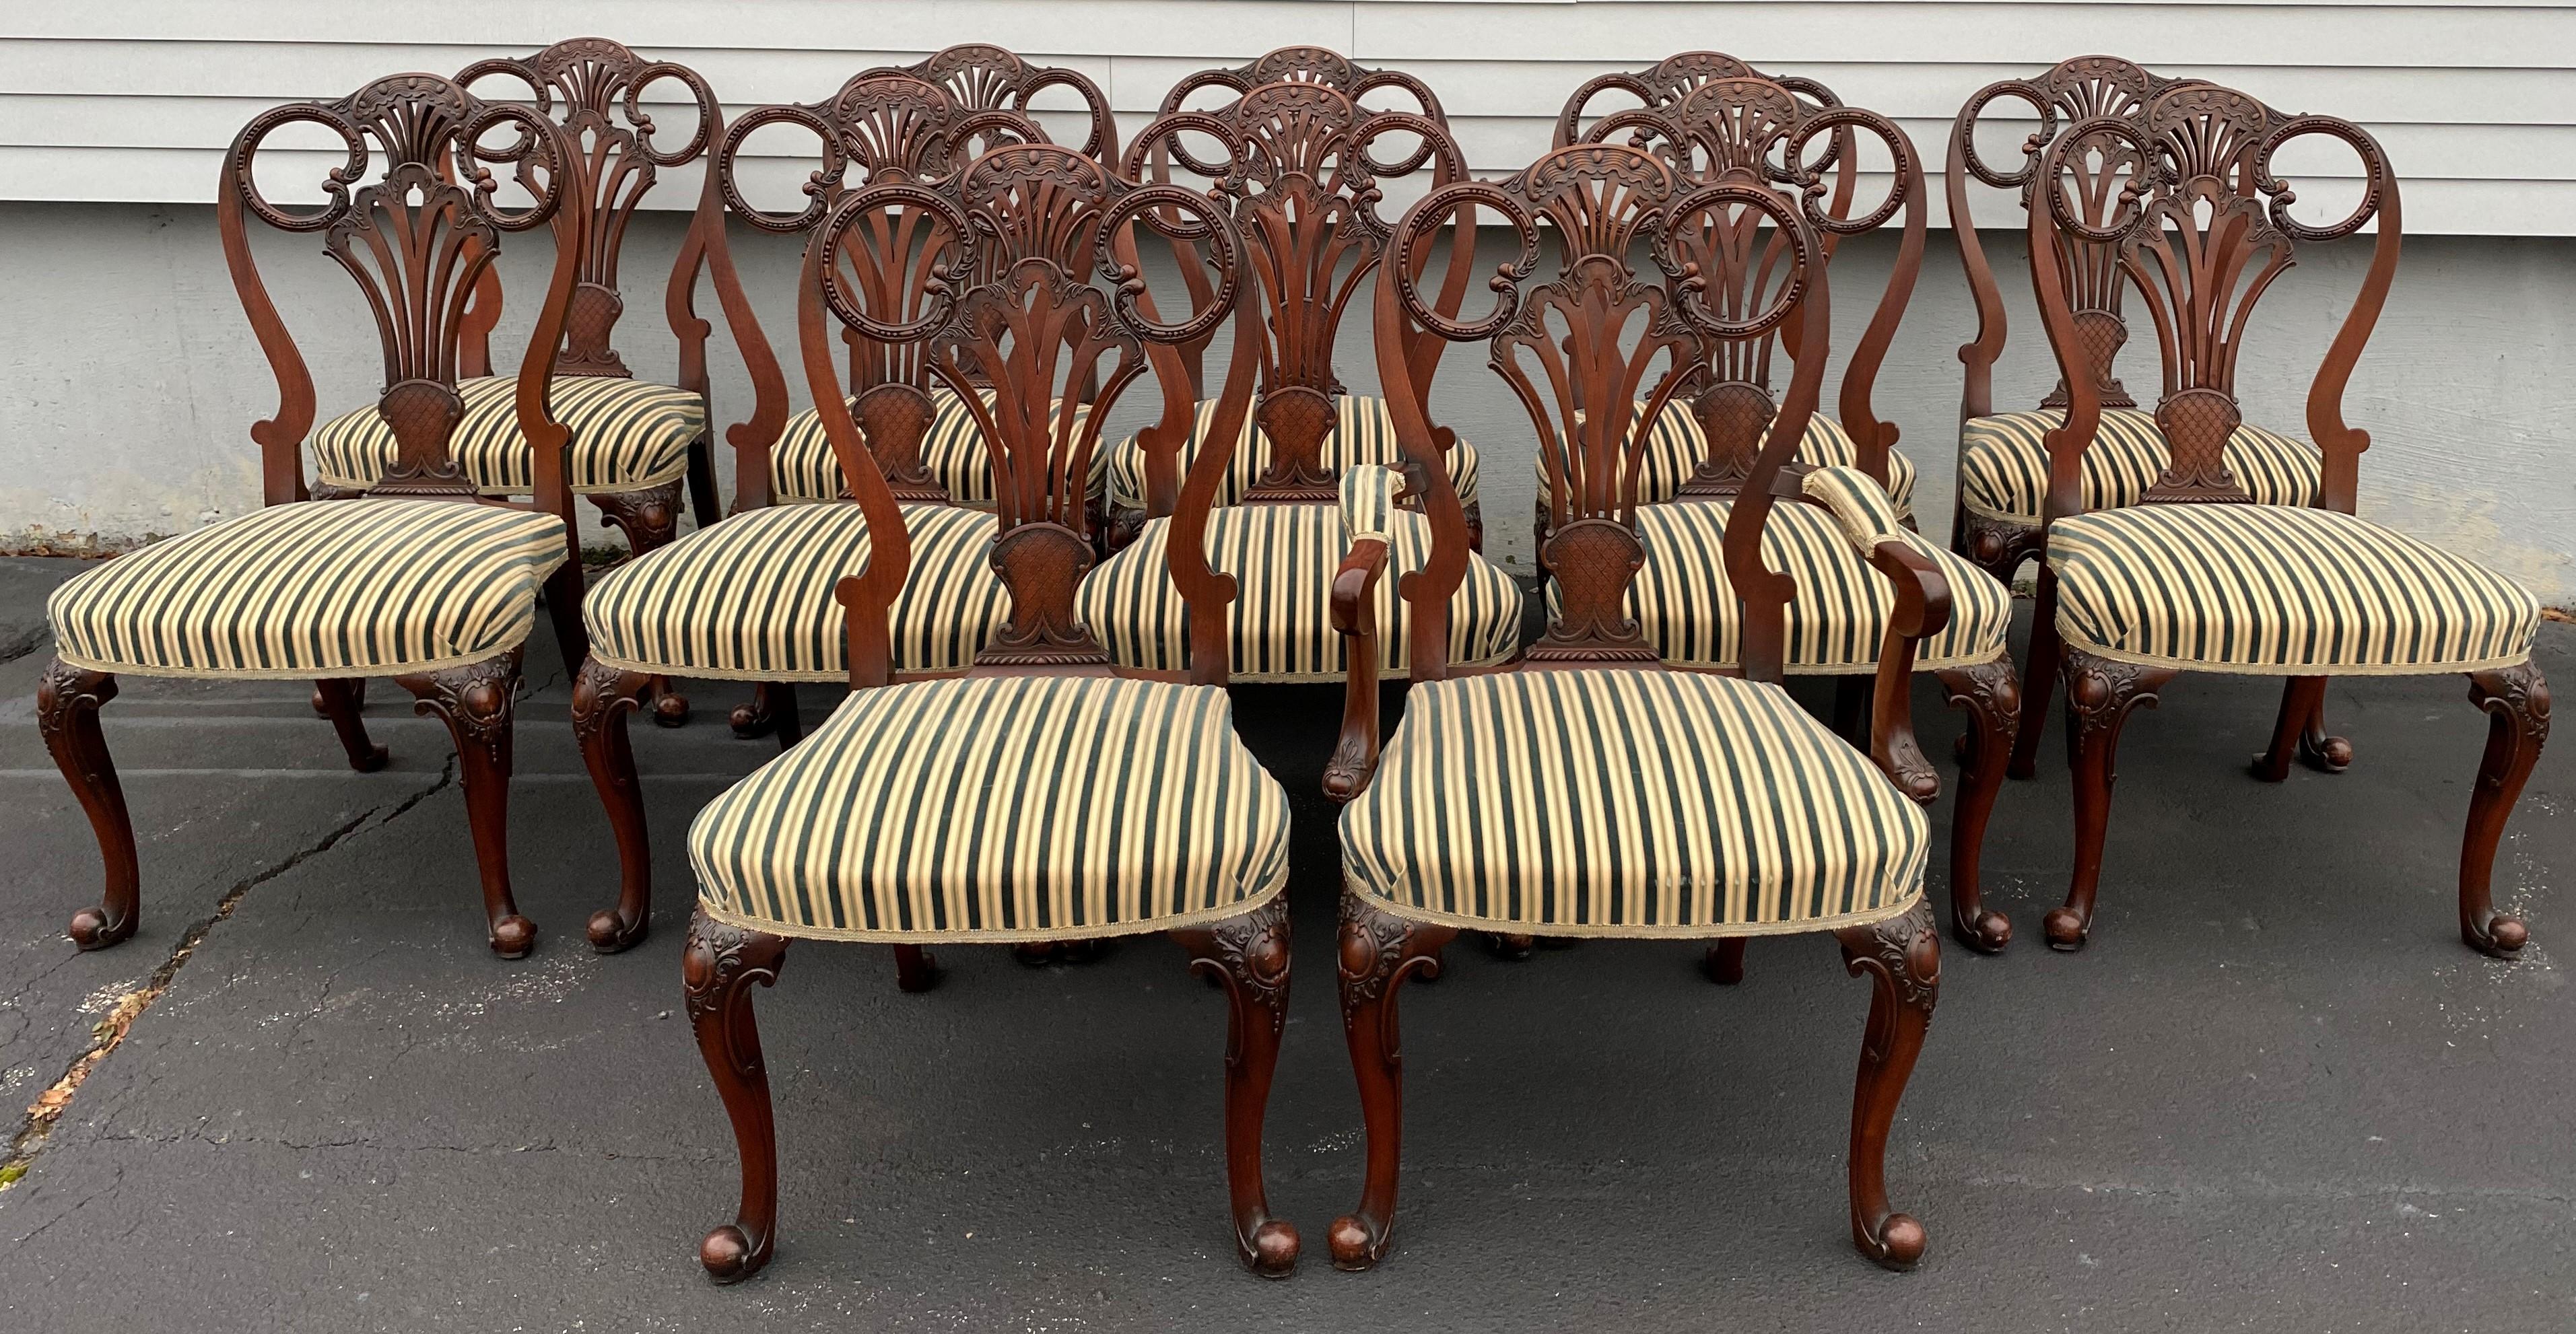 A beautiful set of twelve Italian custom mahogany Queen Anne style dining chairs, including 11 side chairs and one arm chair, with pierce carved back splats, cabriole legs terminating in scrolled ball feet, and finished with bold striped upholstery.